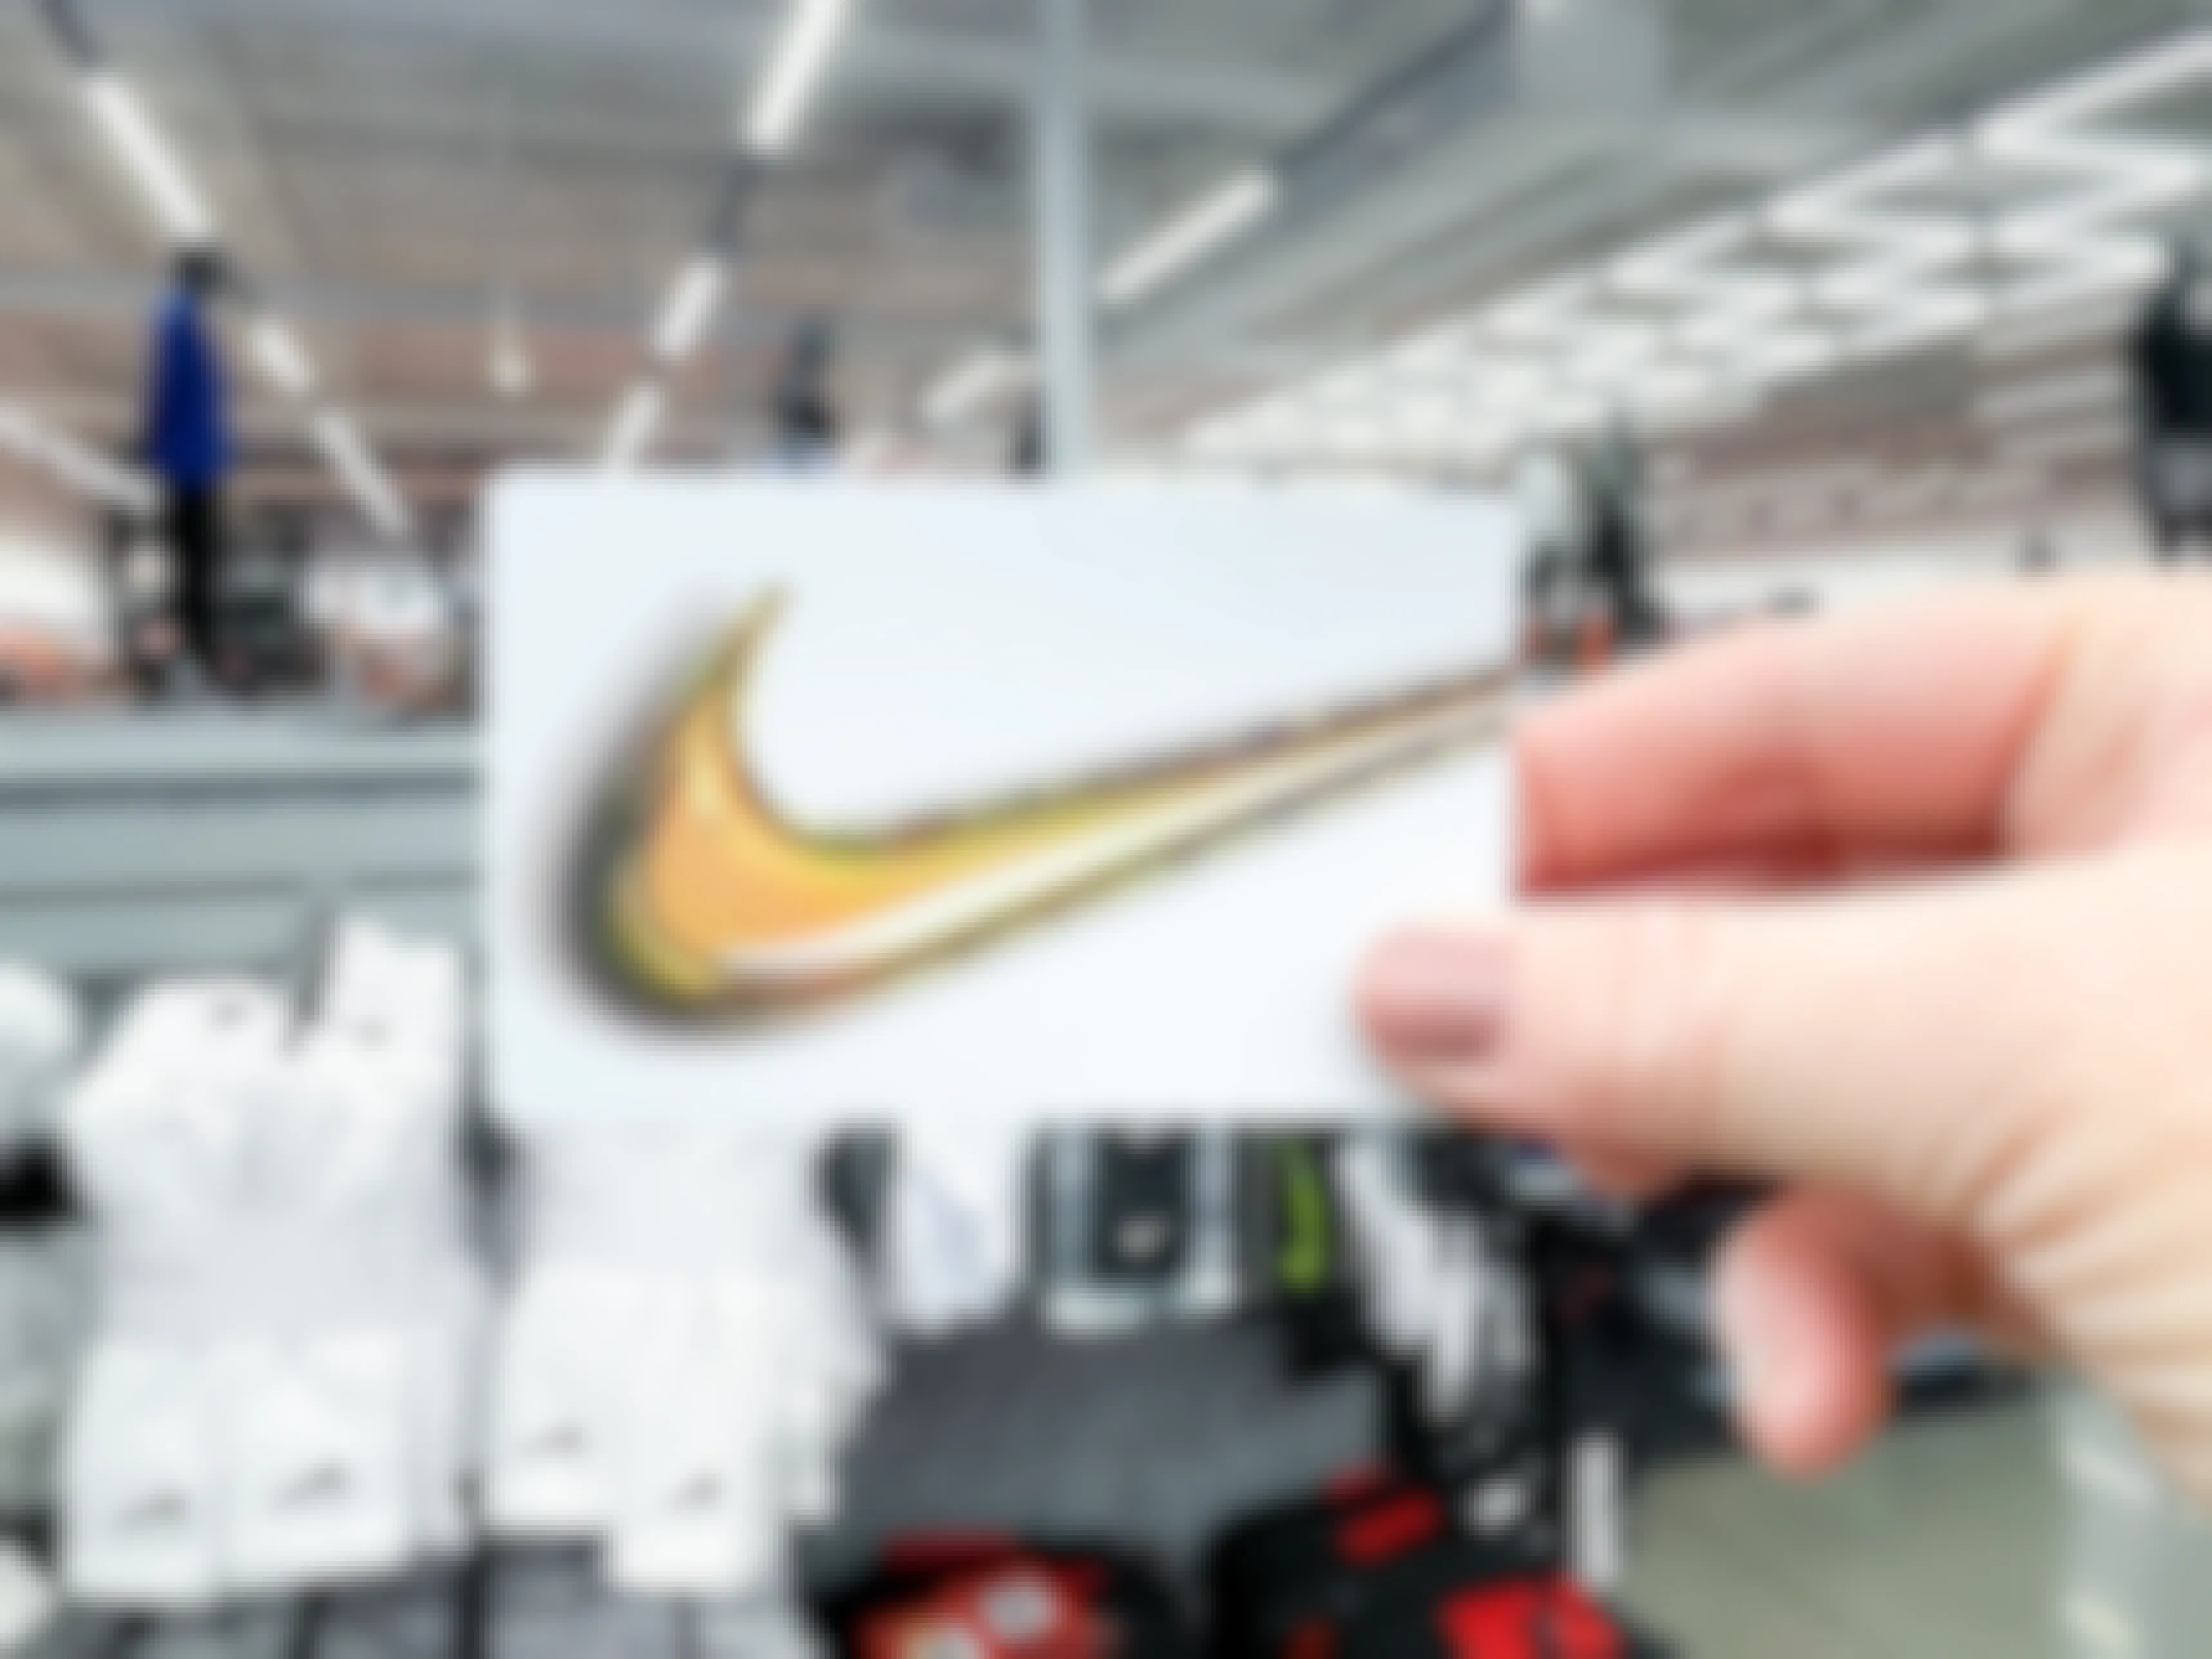 Someone holding up a Nike gift card inside a Nike store.